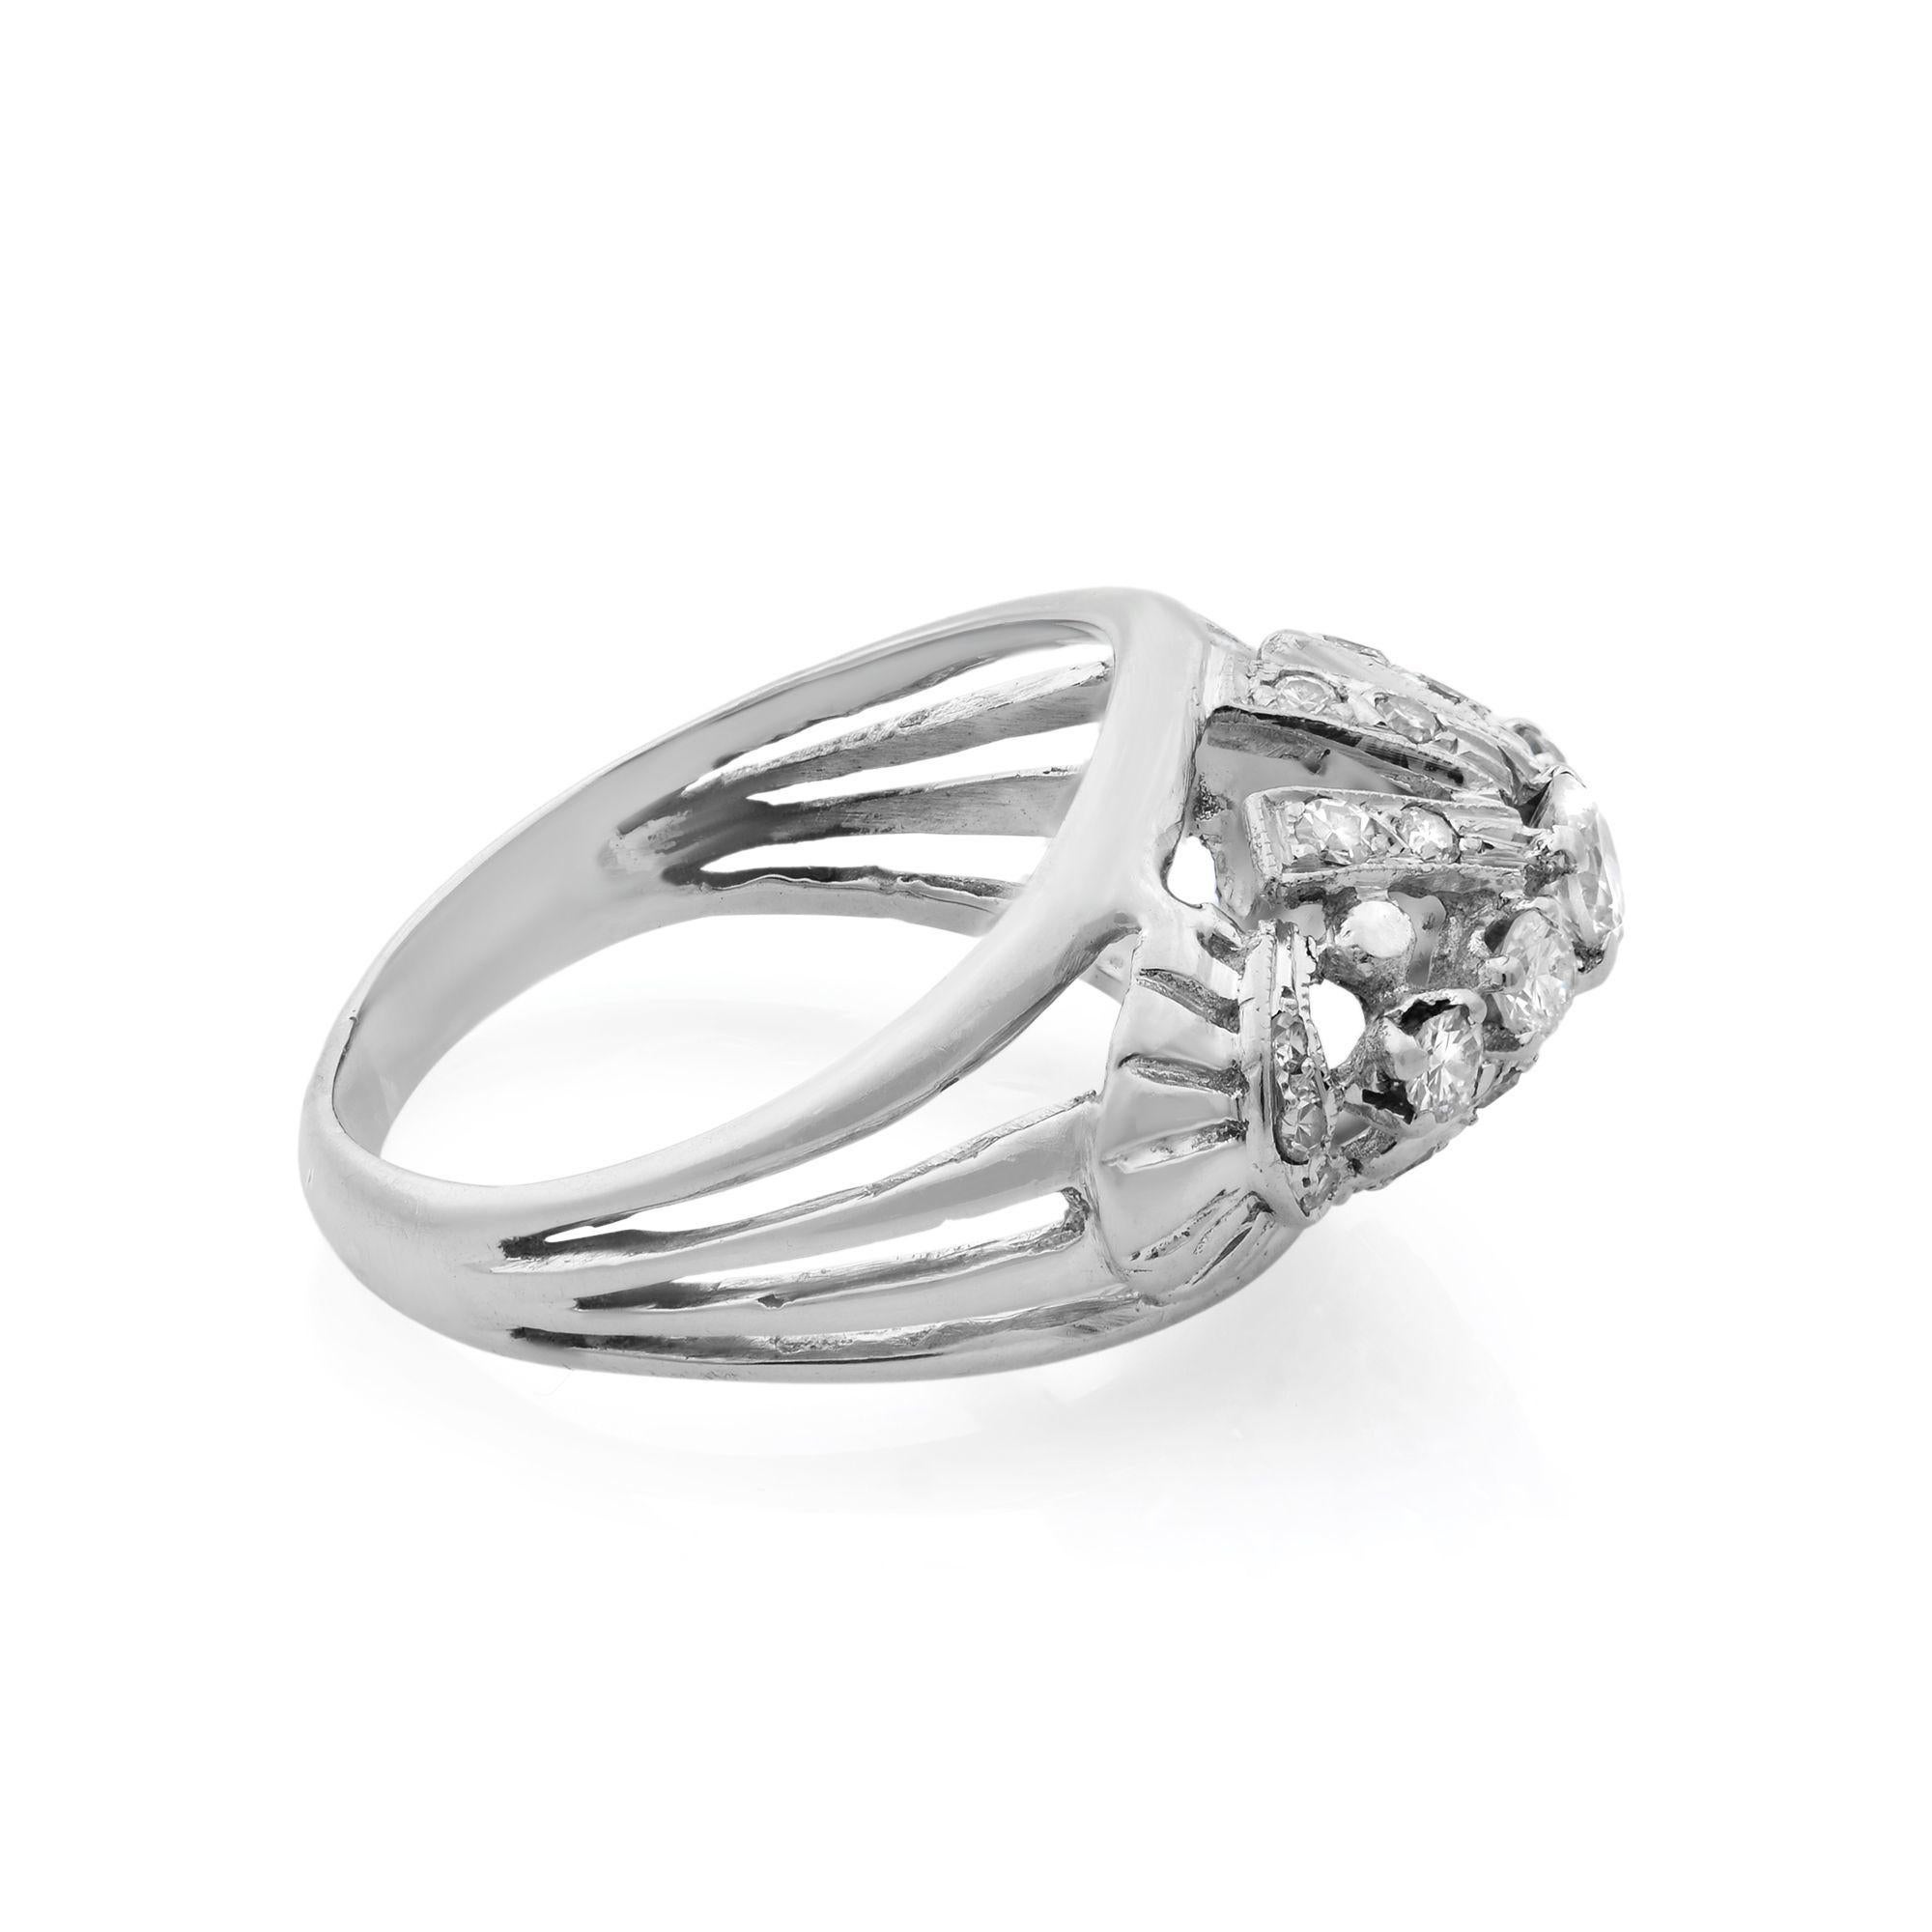 Modern Vintage Dome Diamond Cocktail Ring 14K White Gold 0.36Cttw For Sale